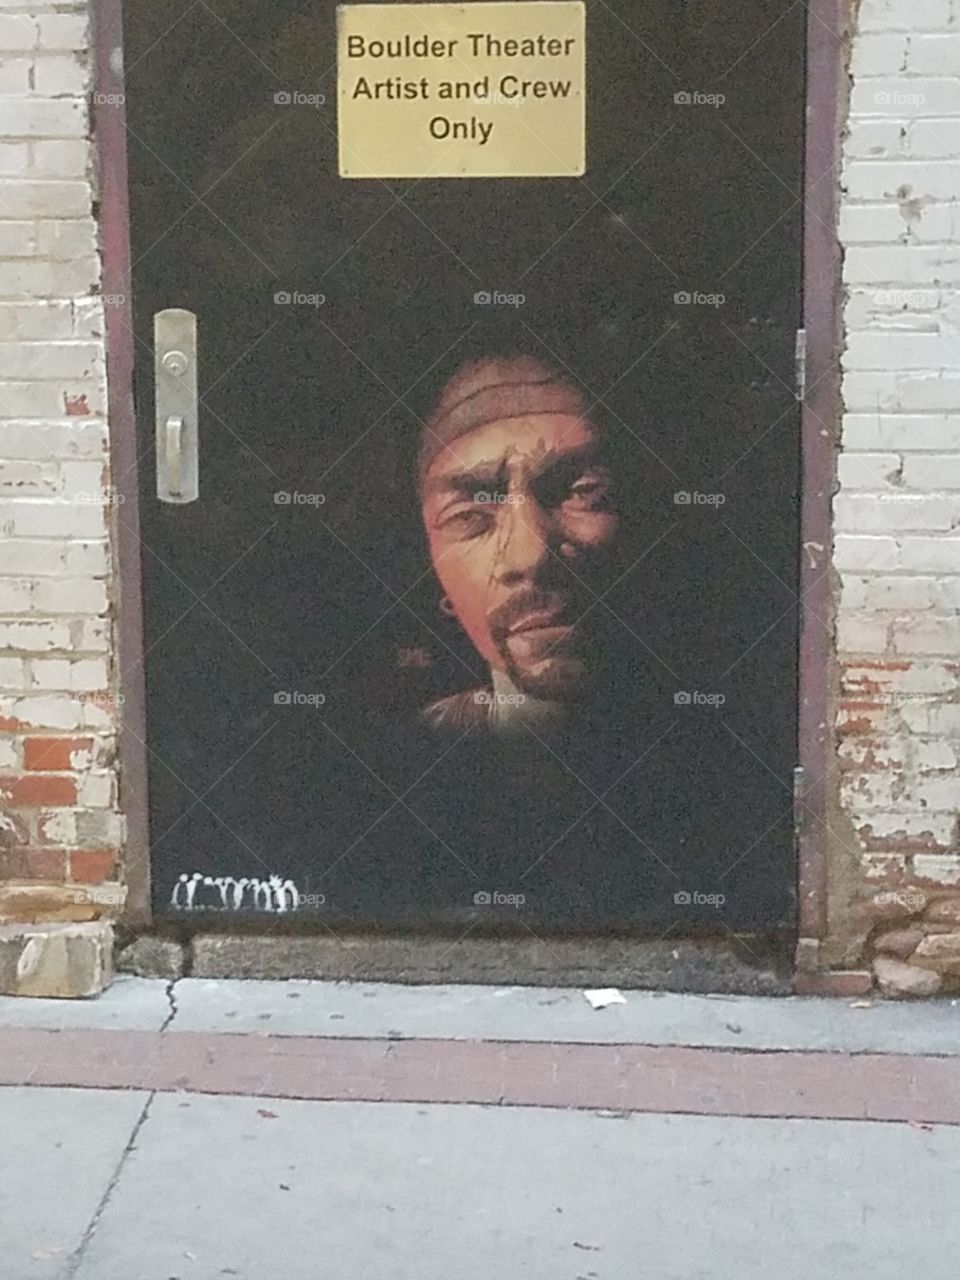 Painted on the back door of the Boulder Theater.